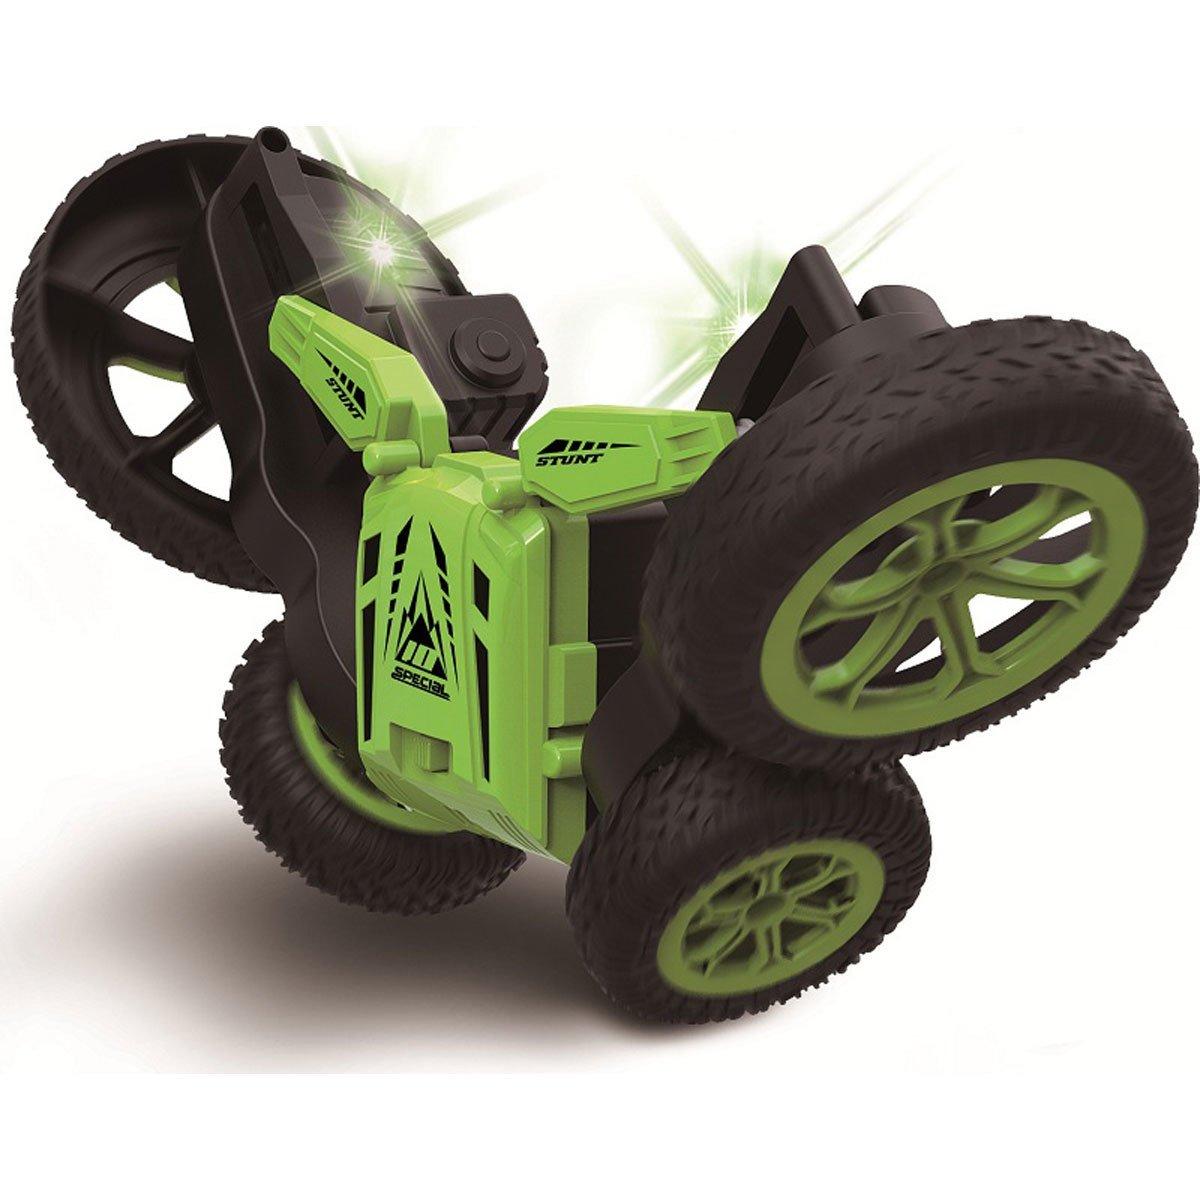 The Entertainer Remote Control Car:  The Entertainer Remote Control Car: Safe, Durable, and Fun.